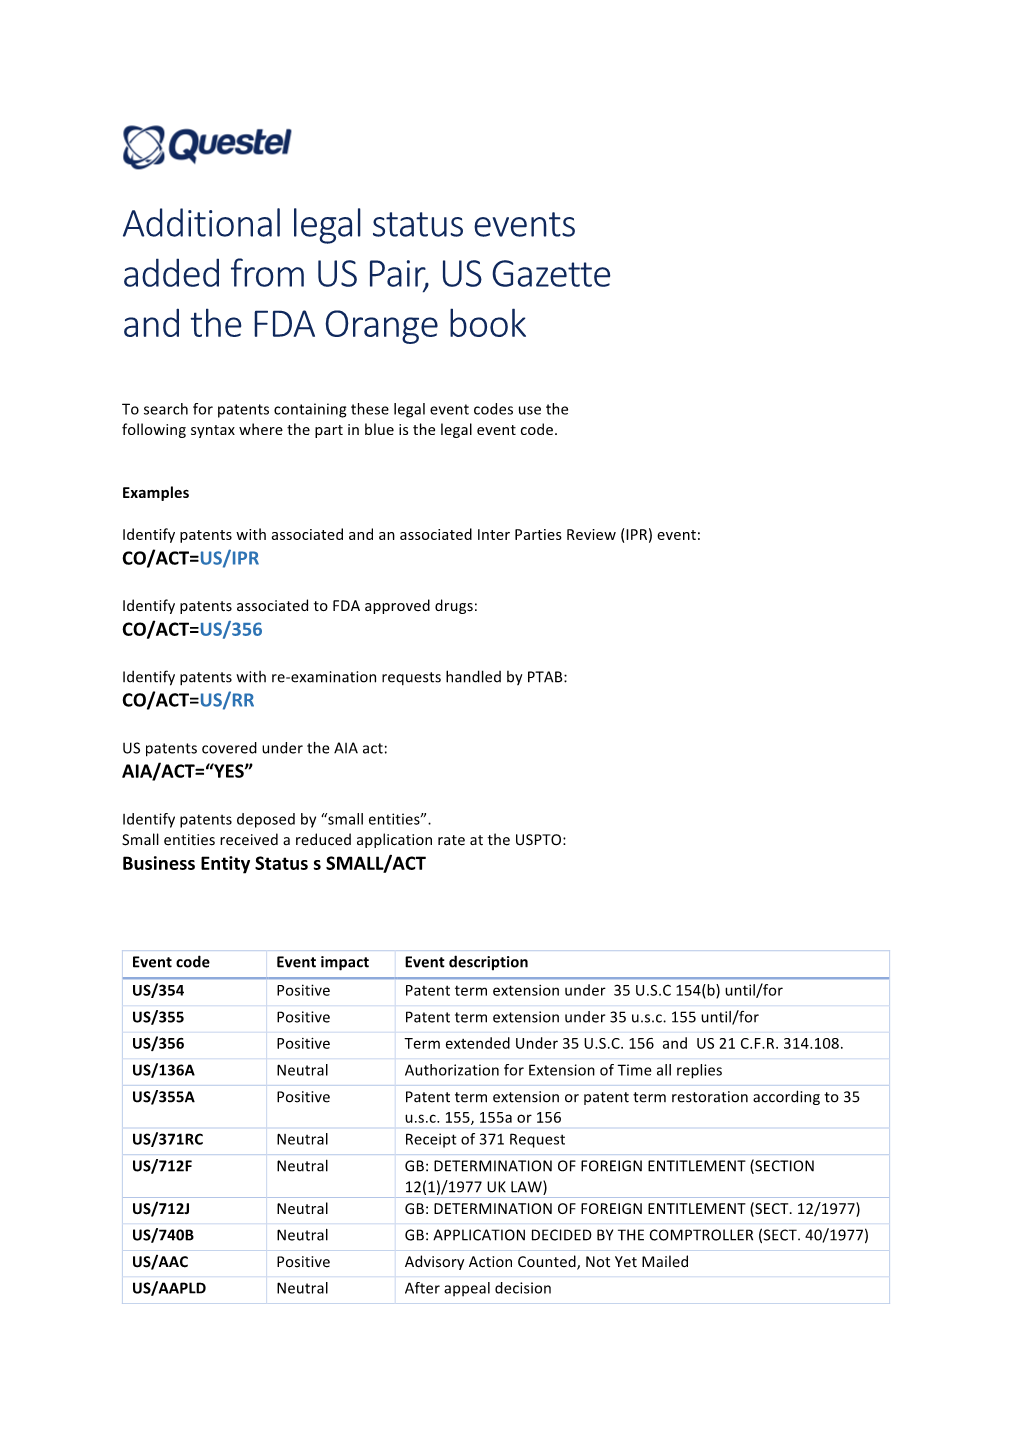 Additional Legal Status Events Added from US Pair, US Gazette and the FDA Orange Book